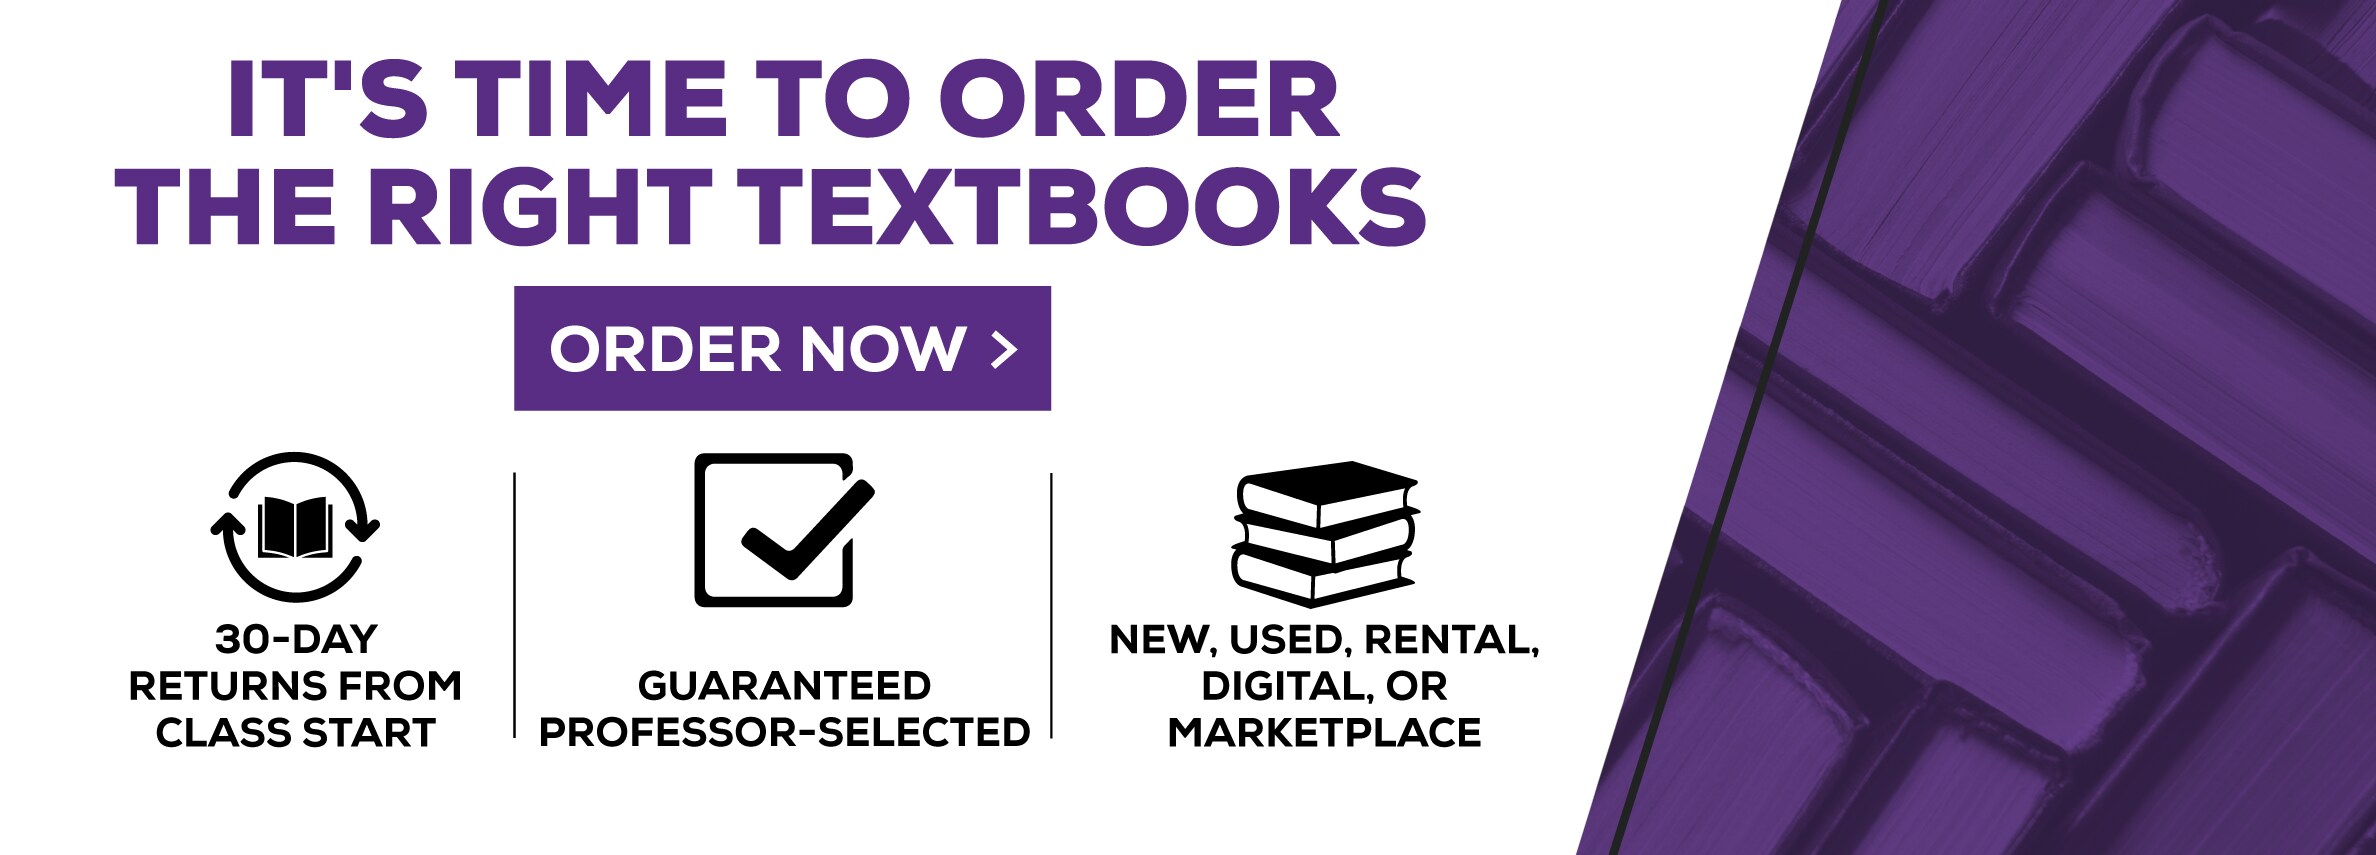 ItÃ¢â‚¬â„¢s time to order the right textbooks. Order now. 30-day returns from class start. Guaranteed professor-selected. New, Used, rental, digital, or marketplace.